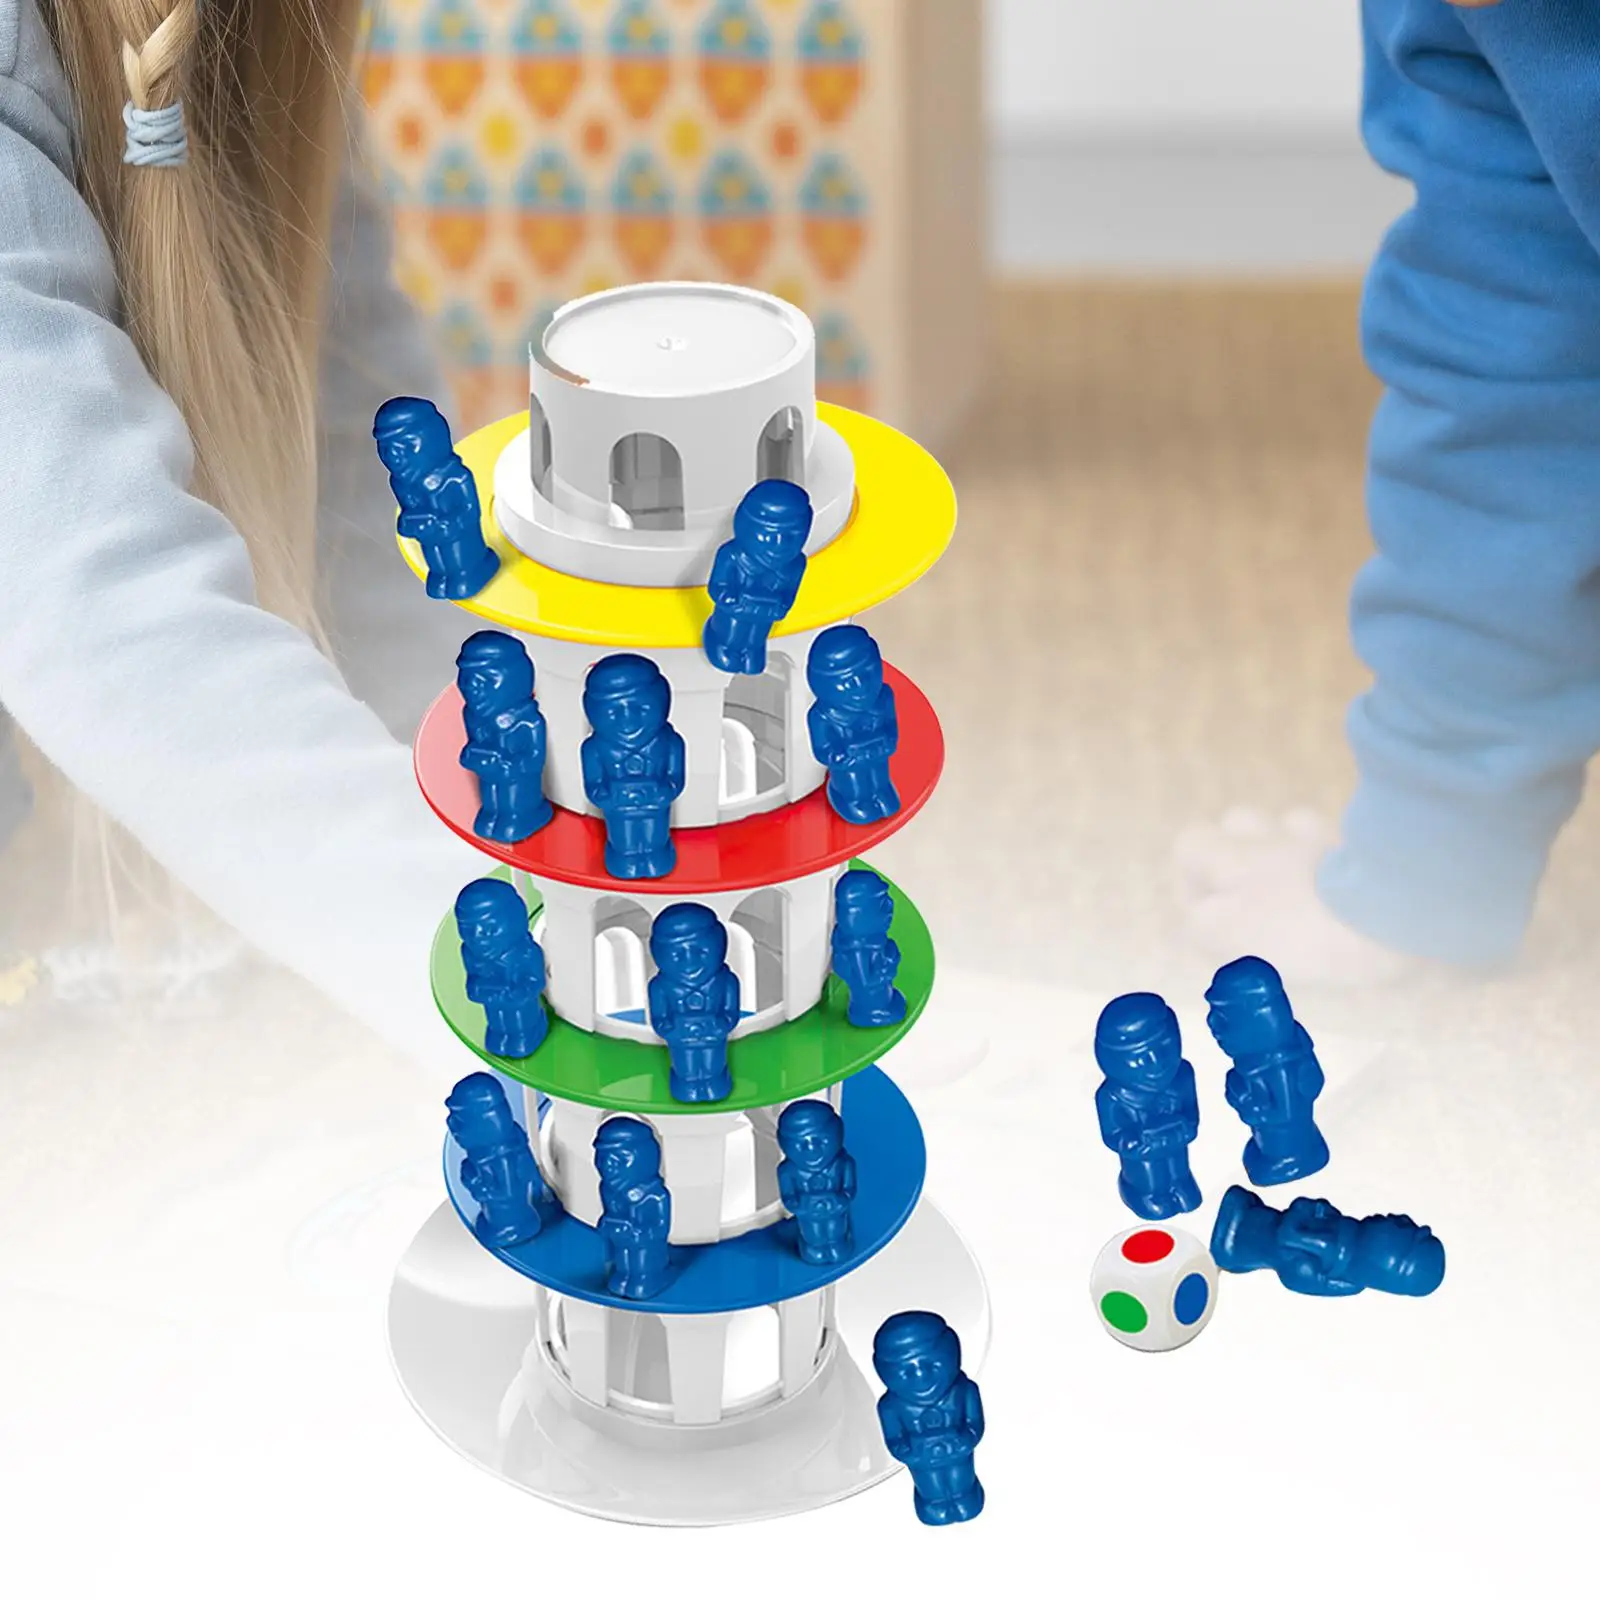 Tower Stacking Montessori Building Blocks Family Games Educational Toys Toppling Leaning Tower Toy for Children Gifts